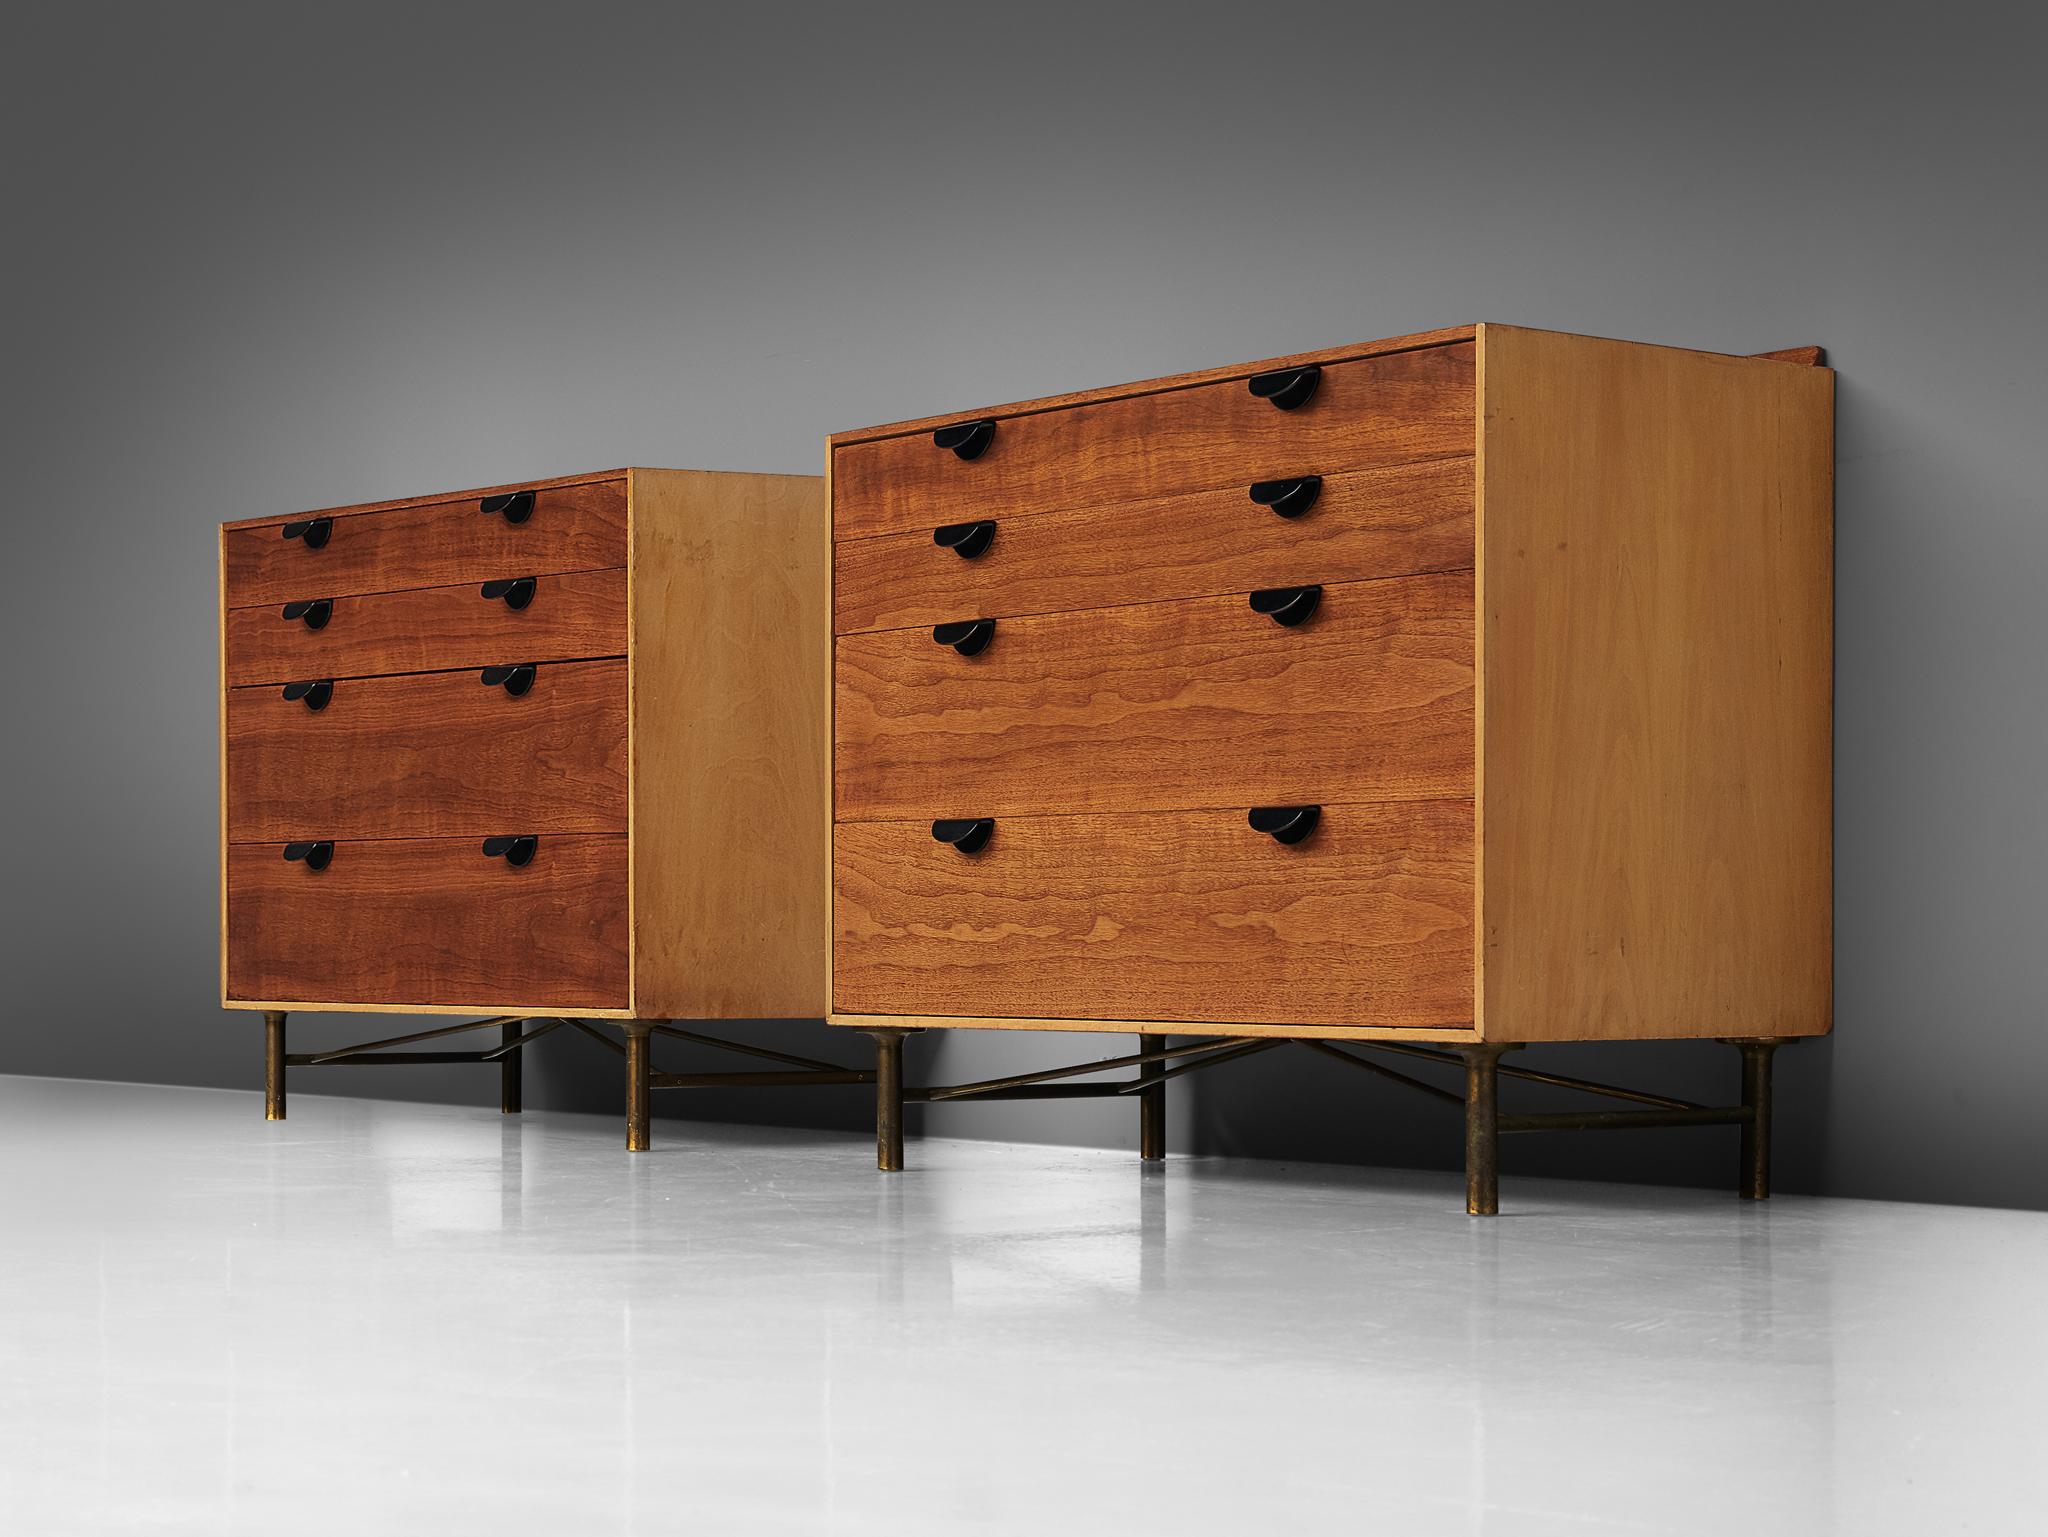 Finn Juhl for Baker Furniture, set of two cabinets, maple, walnut and metal, Unites States, 1950s

A set of two small cabinets by Finn Juhl for the American company Baker Furniture. These cabinets were part of the first Danish Modern furniture